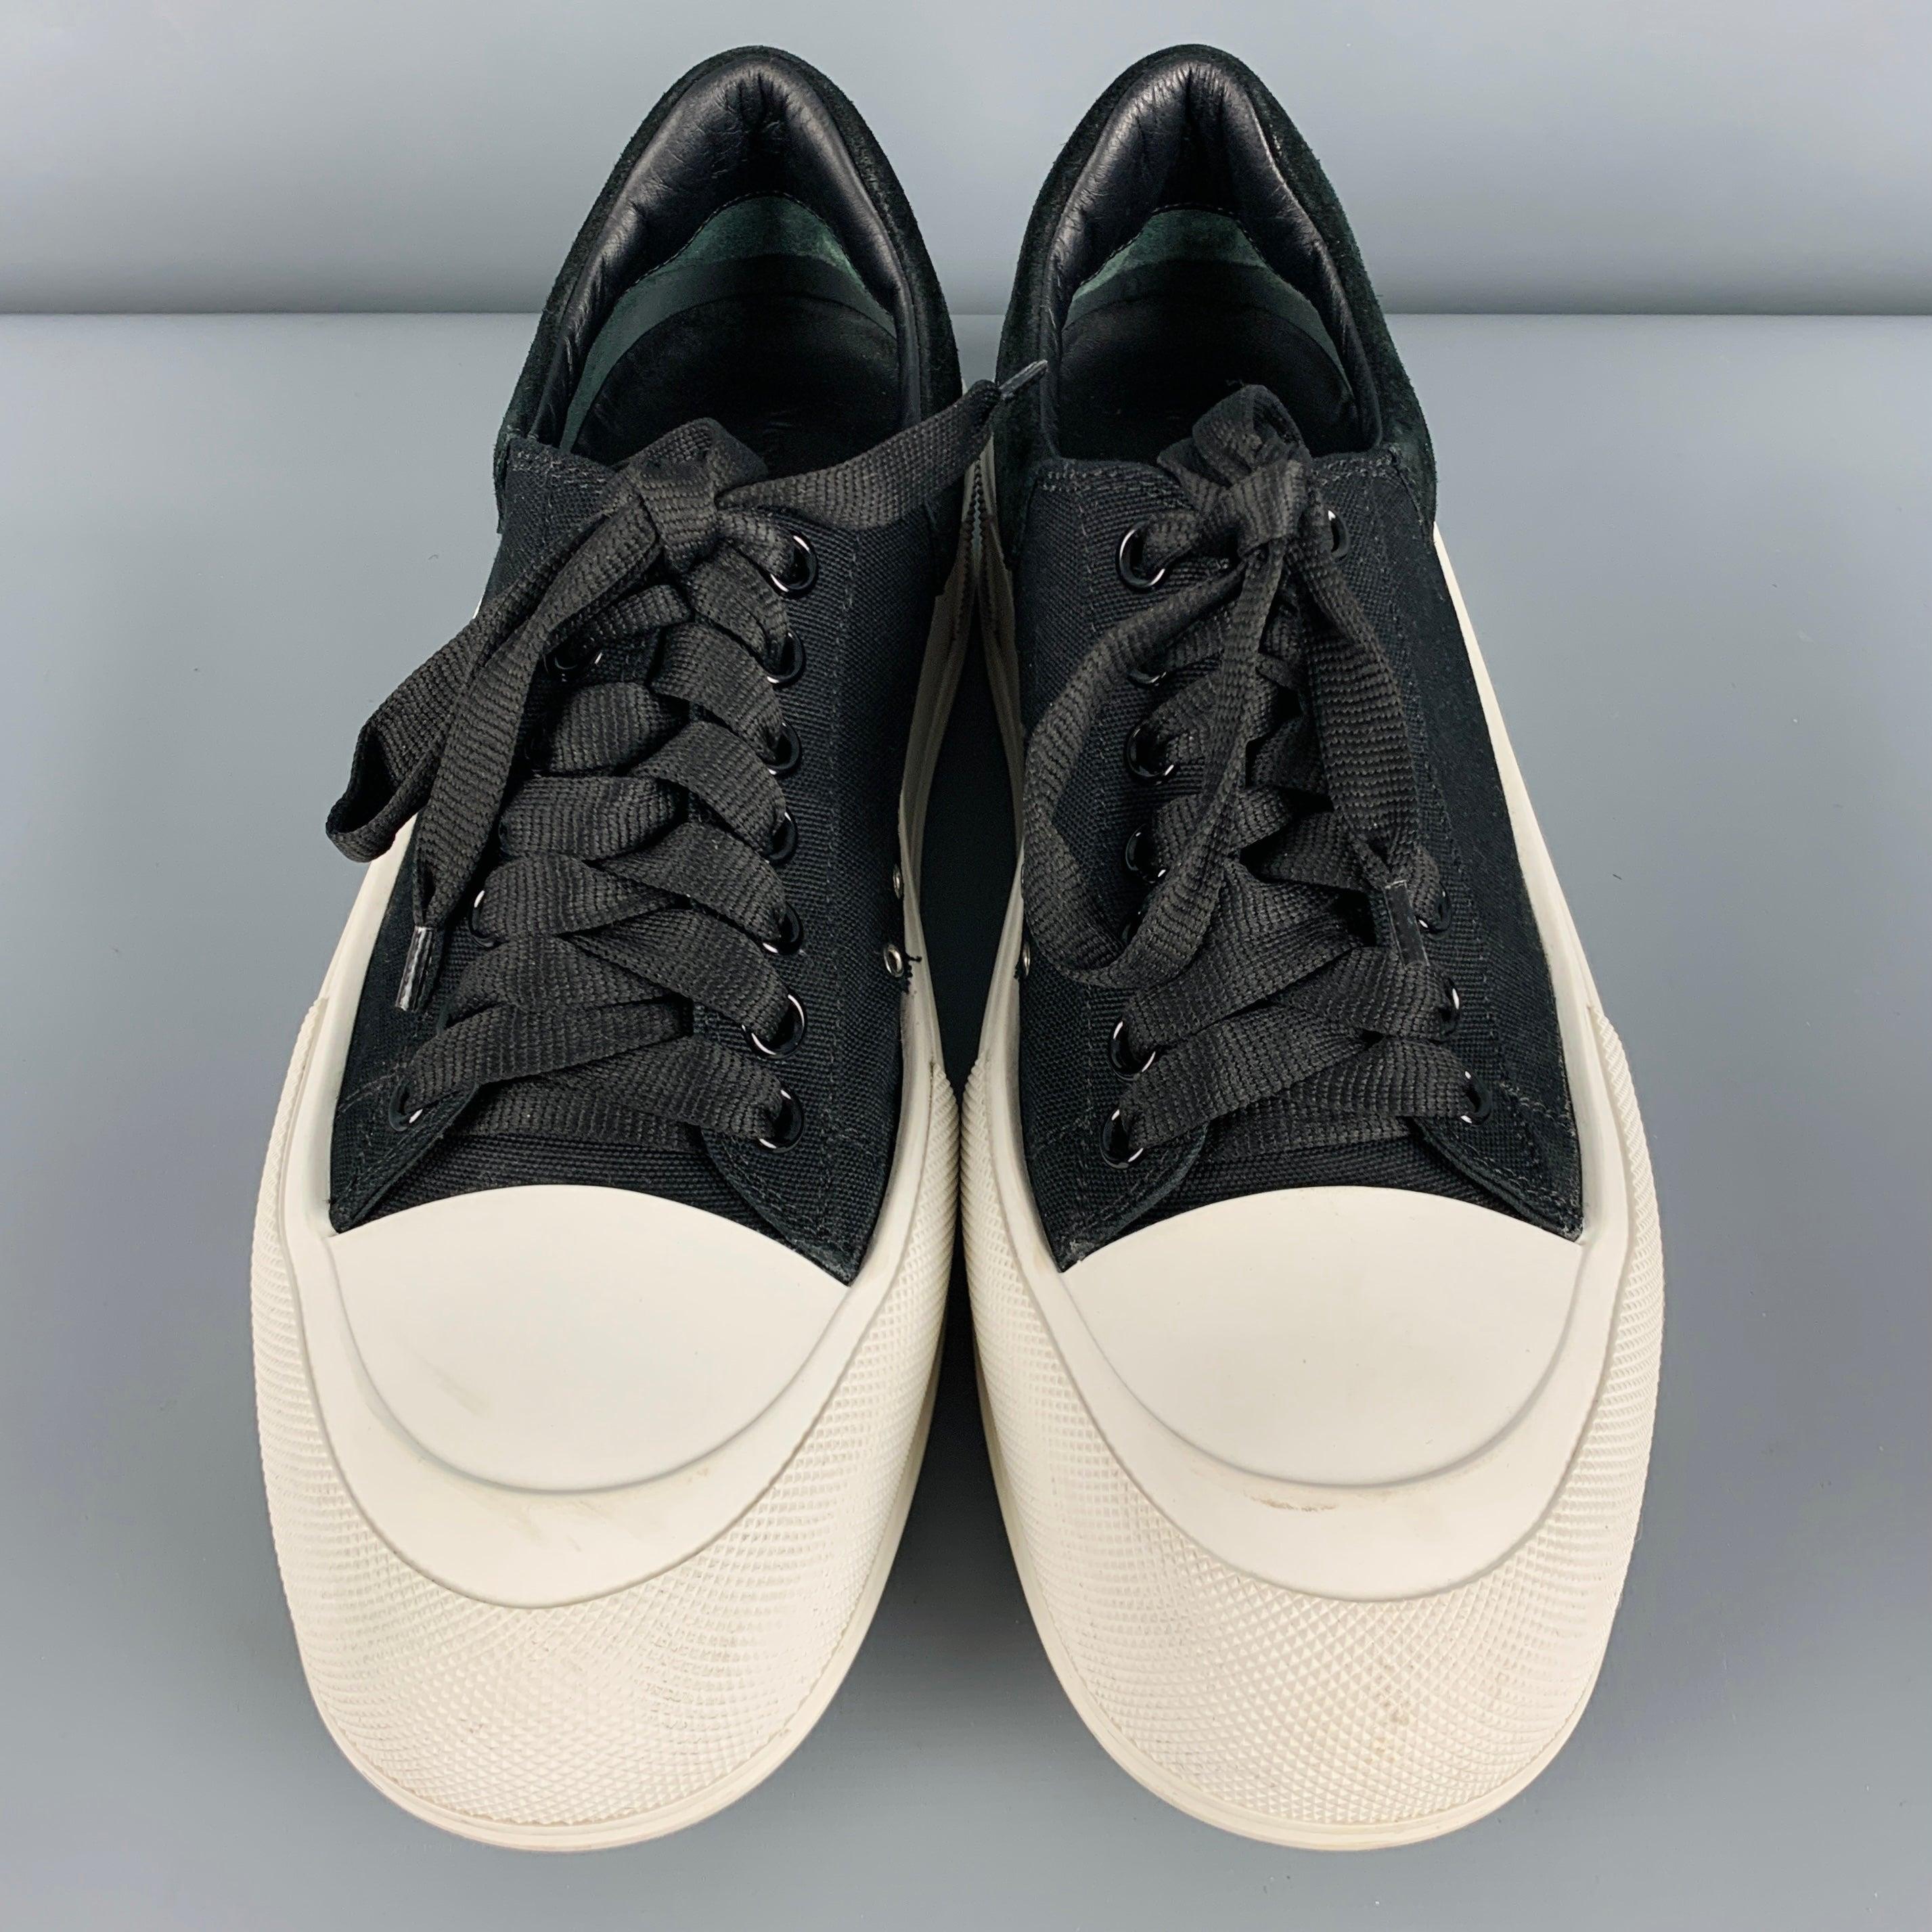 Men's ALEXANDER MCQUEEN Size 10 Black White Two Toned Canvas Lace-Up Sneakers